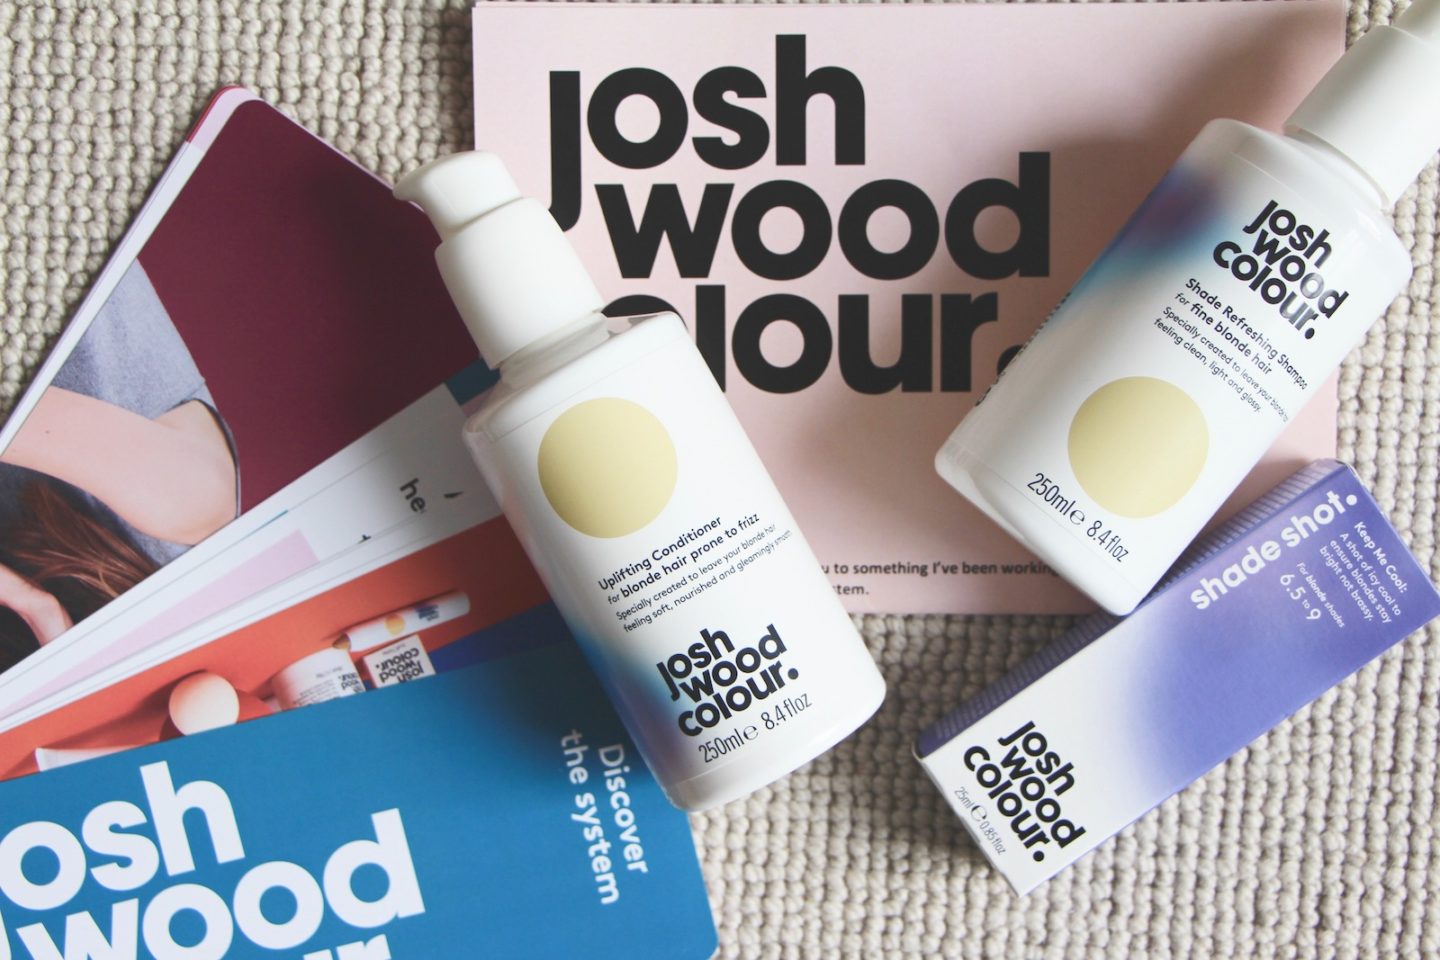 Josh Wood Colour: The Ultimate Hair Colour System